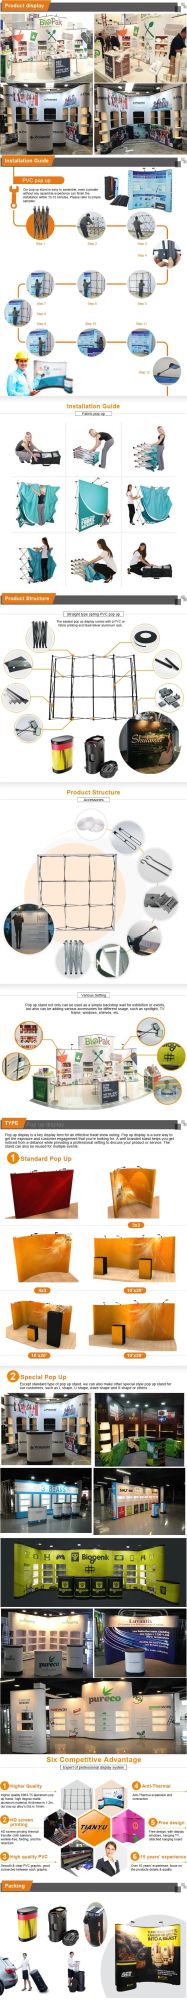 Advertising Equipment Tension Fabric Display Pop up Stand